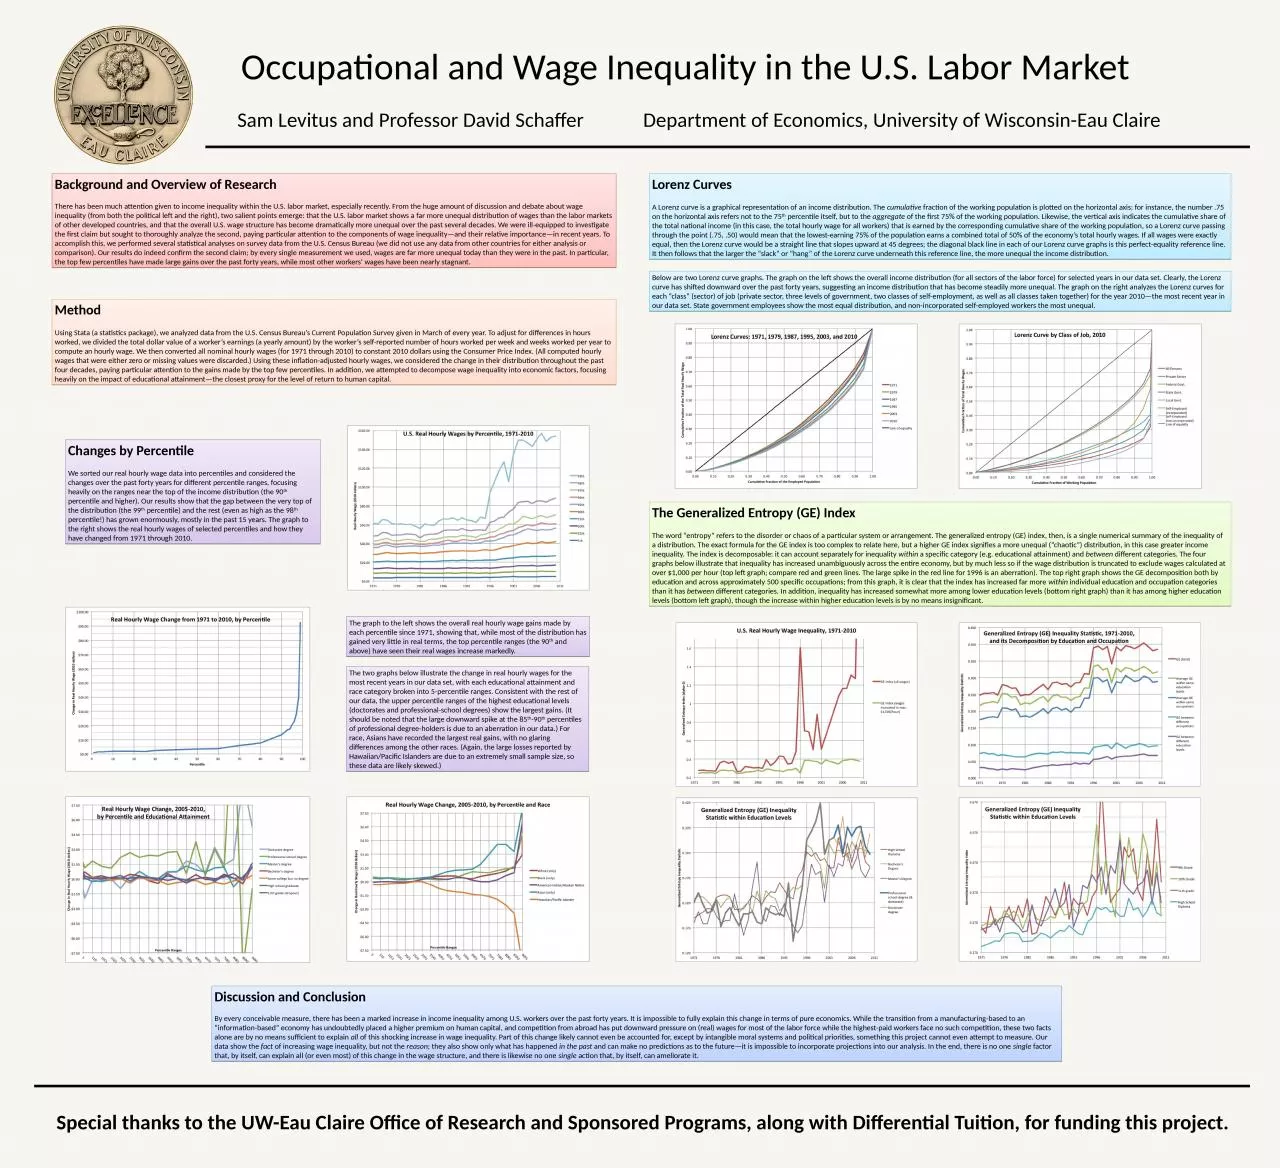 Occupational and Wage Inequality in the U.S. Labor Market